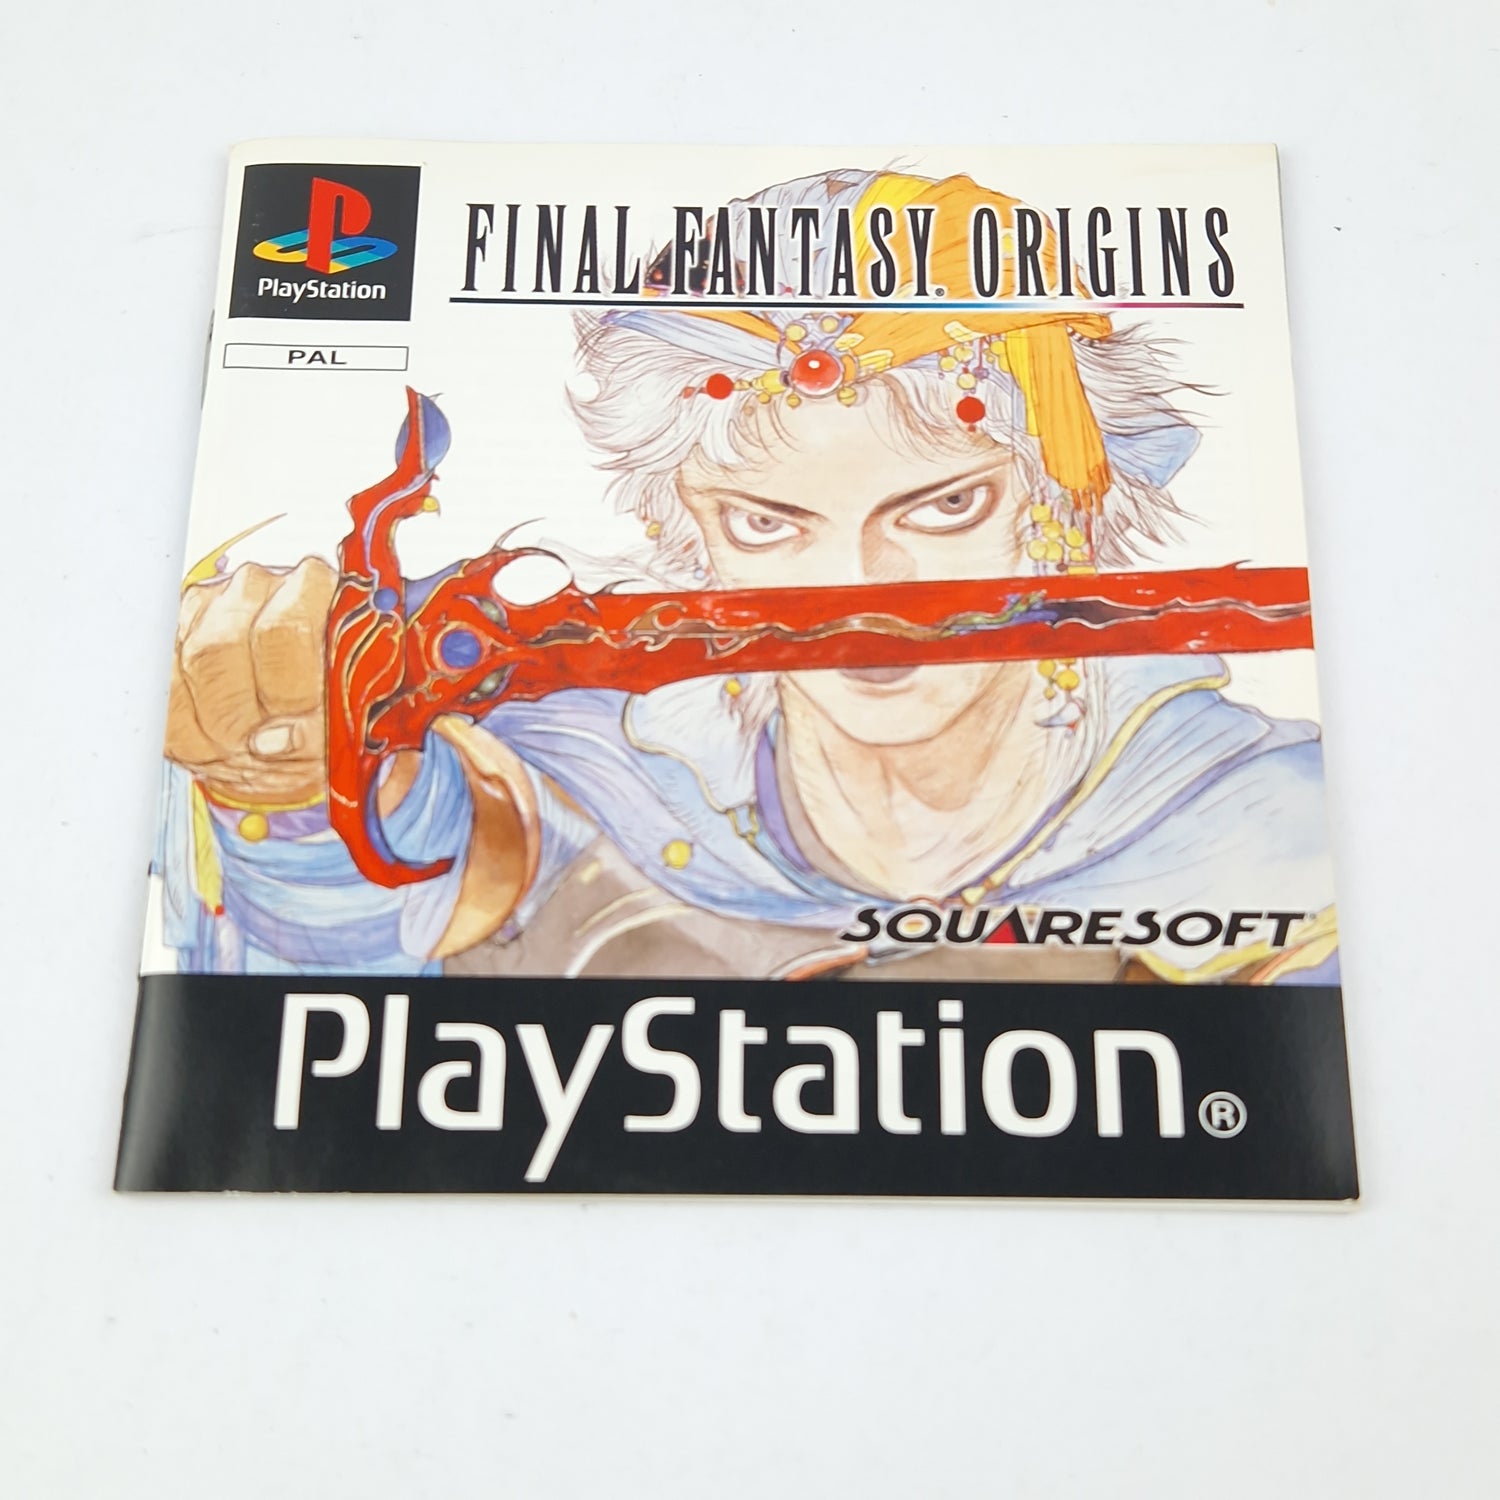 Playstation 1 game: Final Fantasy Origins - CDs with instructions without original packaging / PS1